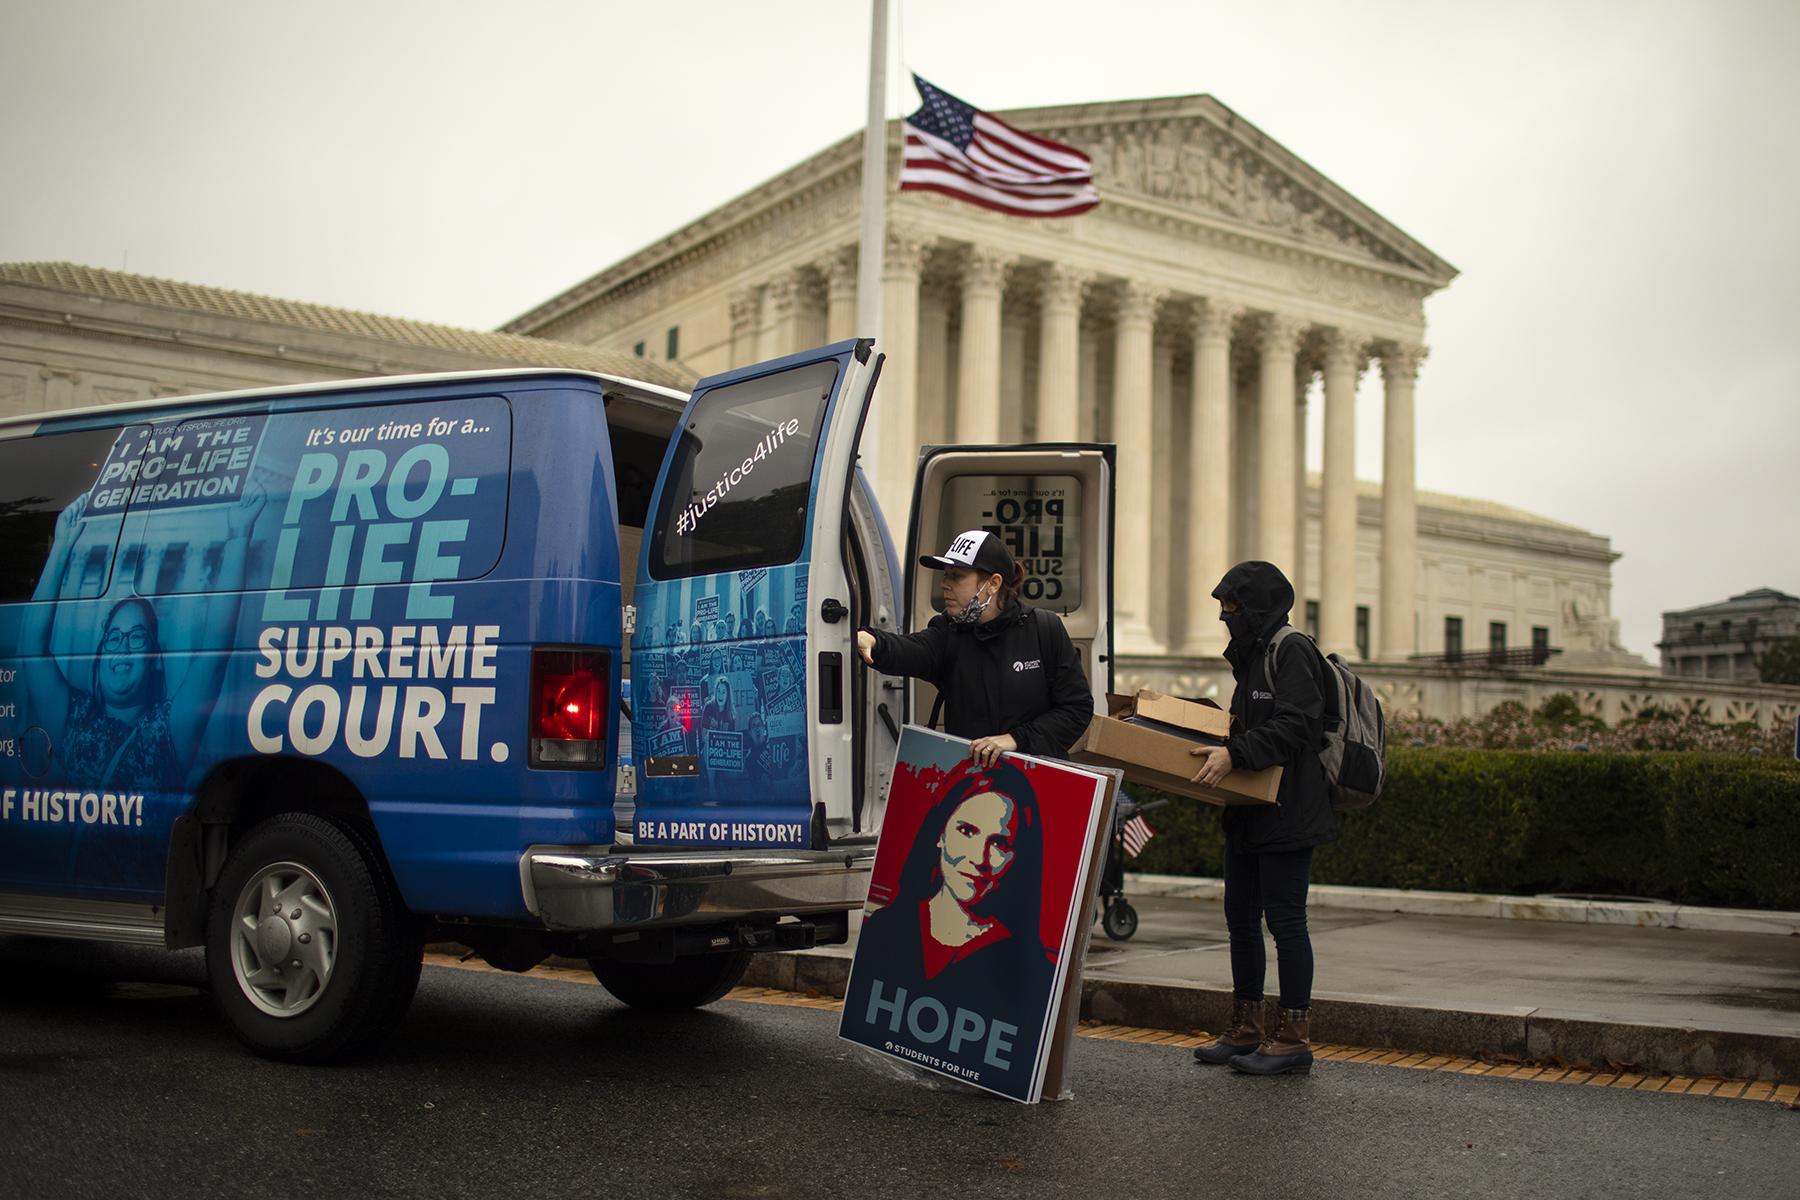 Protests, Pestilence & Politics - At the U.S. Supreme Court on the first day of...